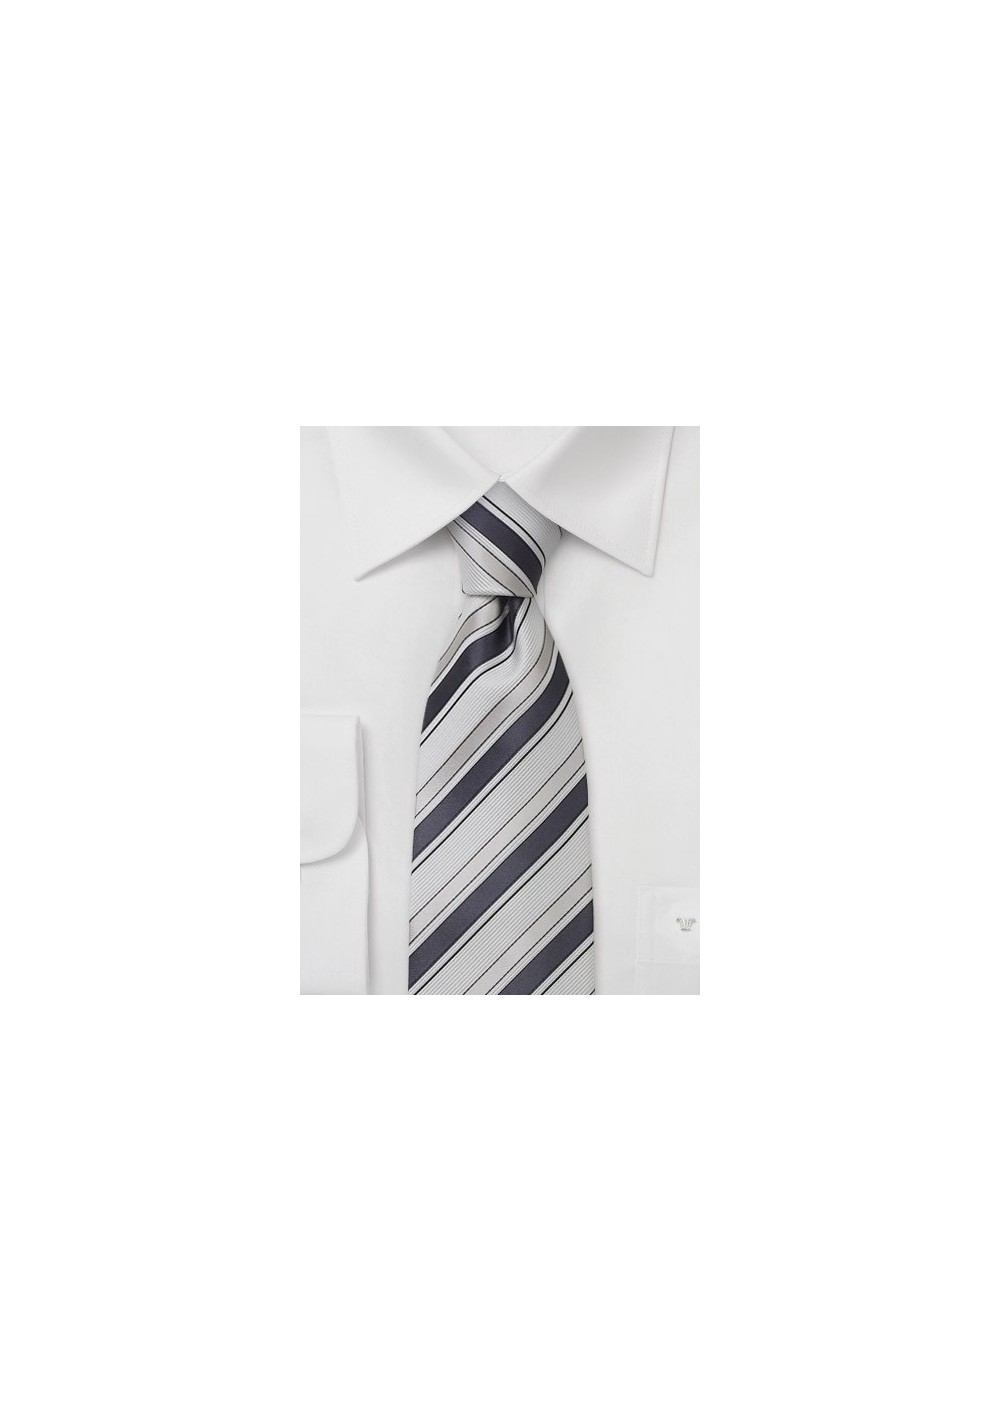 Handmade striped necktie - Tie with white, silver, and charcoal gray stripes